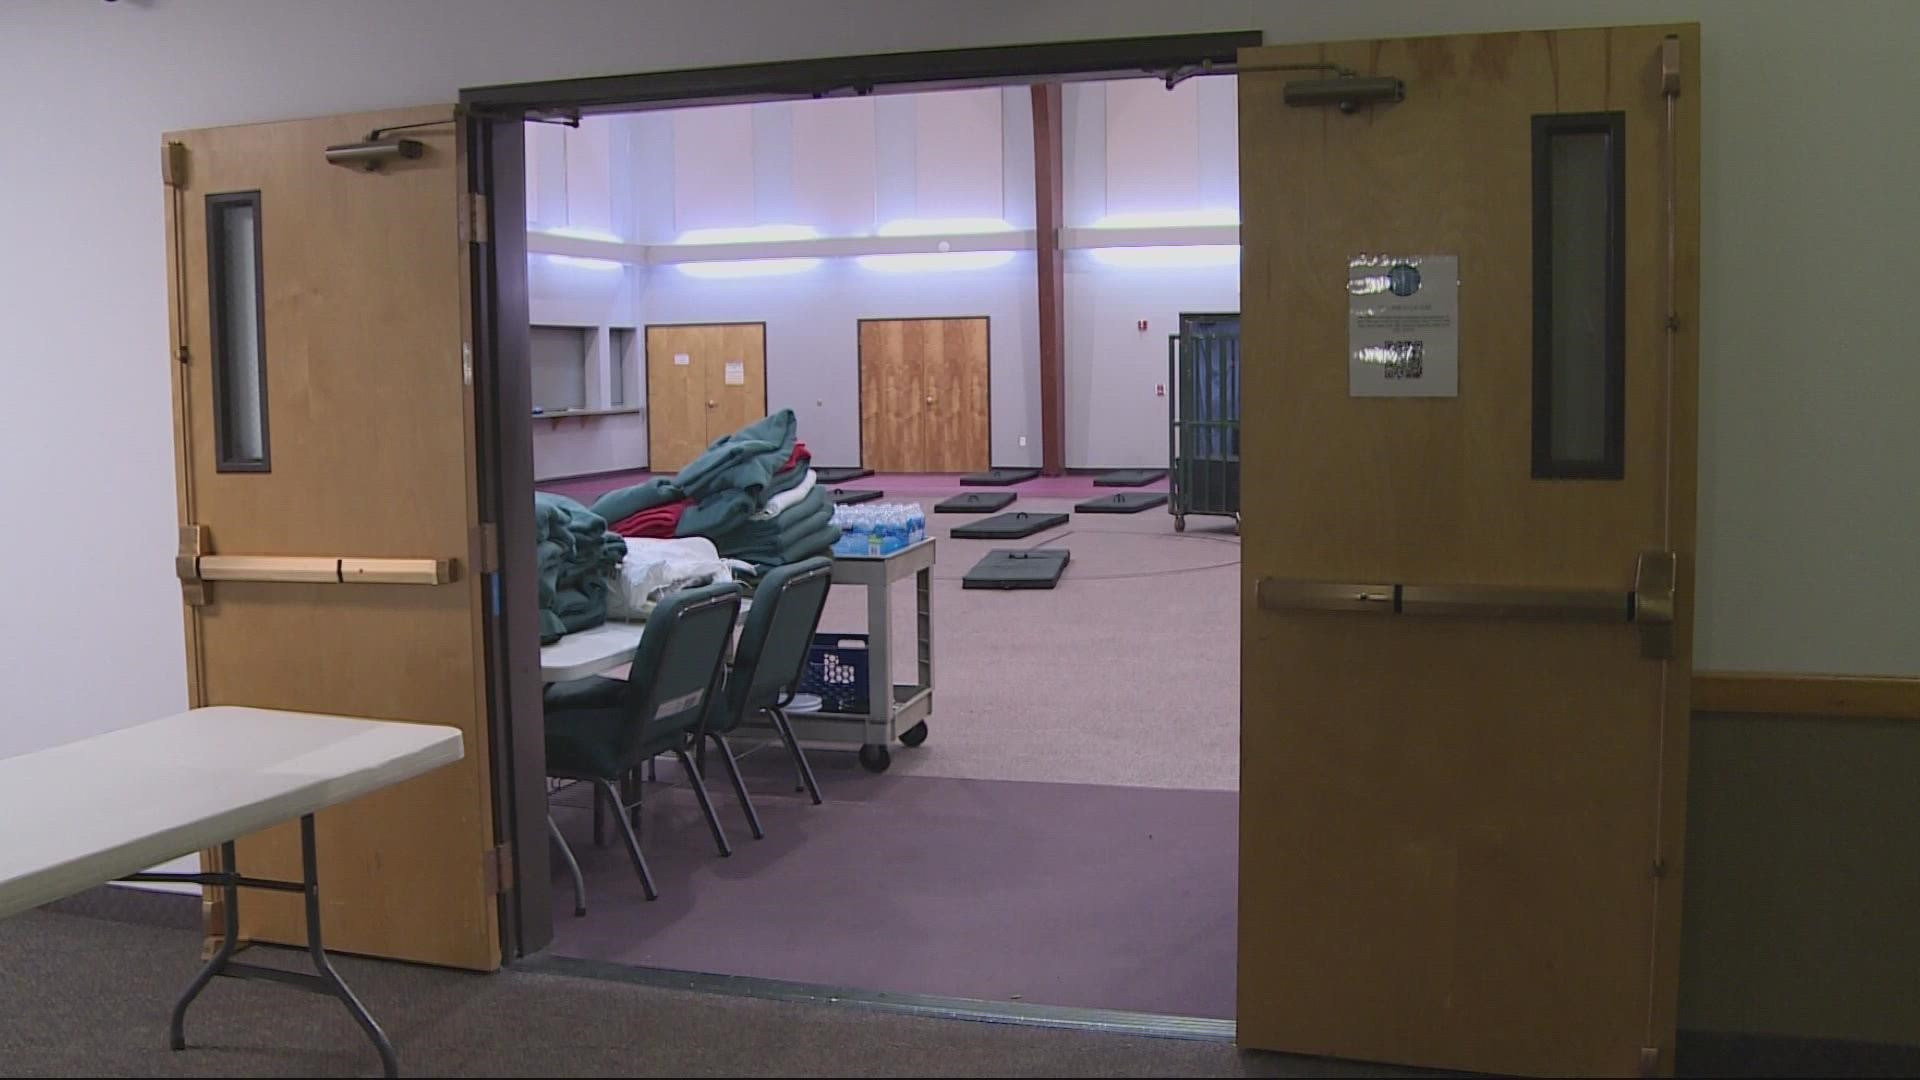 The Union Gospel Mission opened their emergency winter shelter at a Southeast Portland church earlier this month.